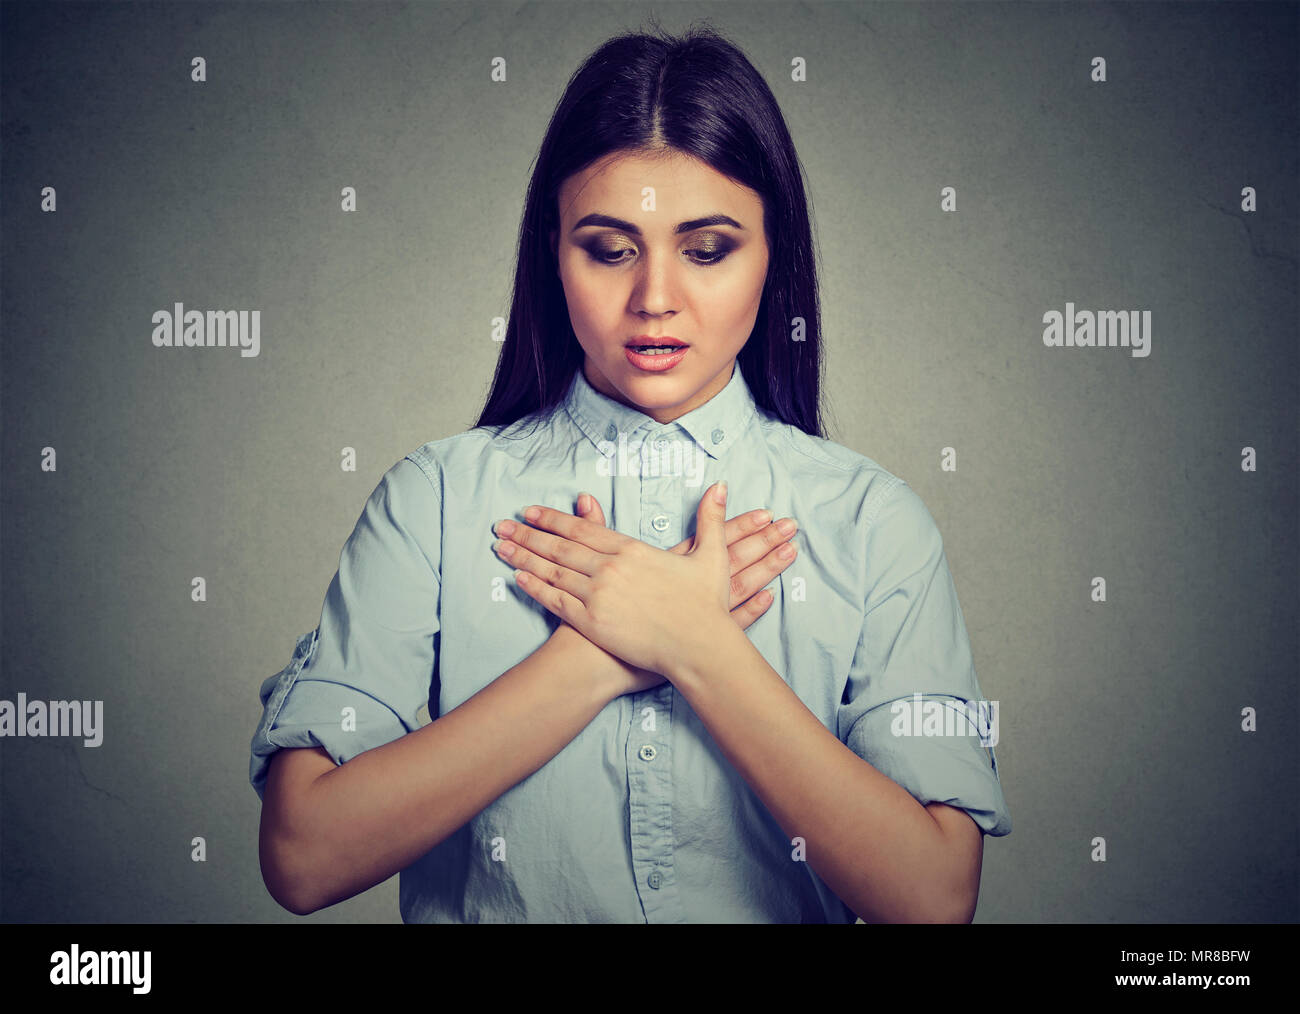 Young woman with asthma attack or respiratory problem isolated on gray background Stock Photo